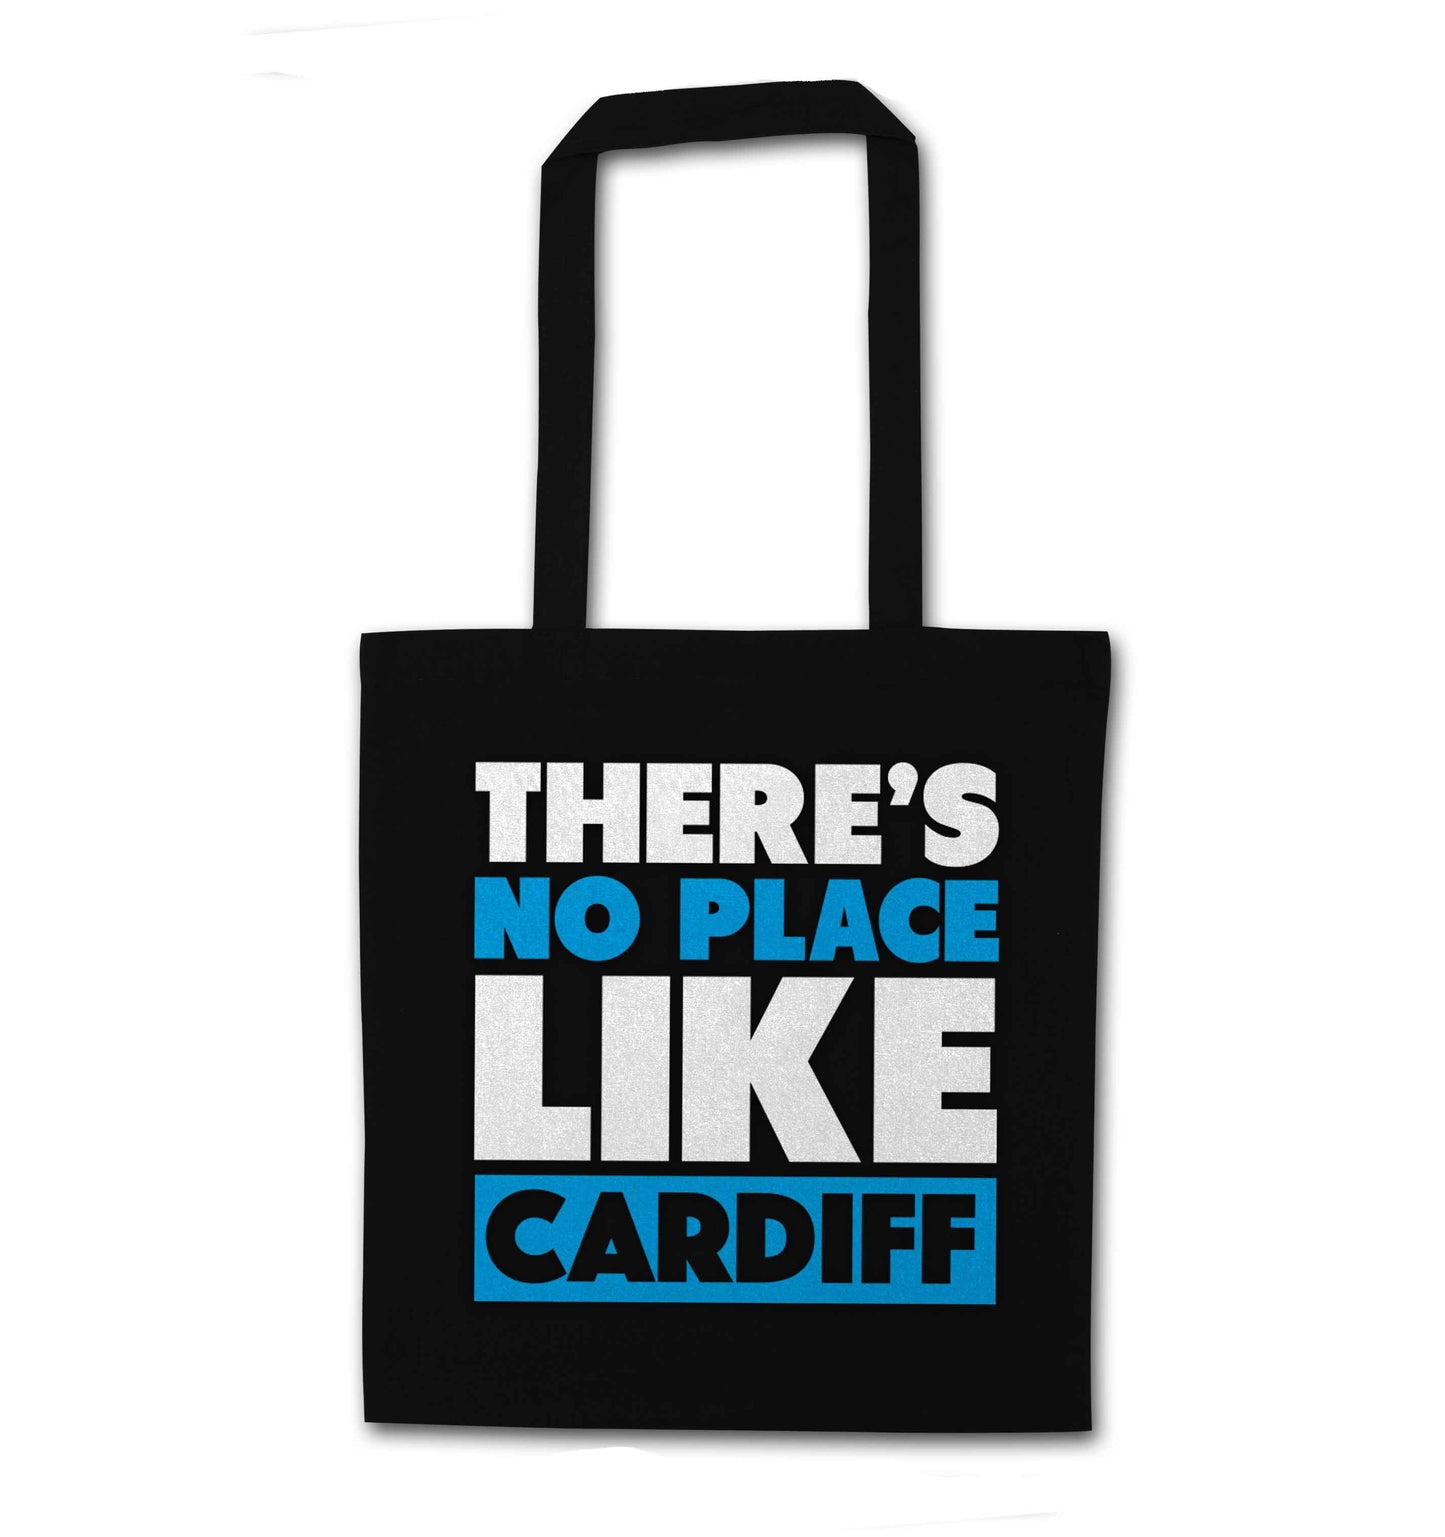 There's no place like Cardiff black tote bag